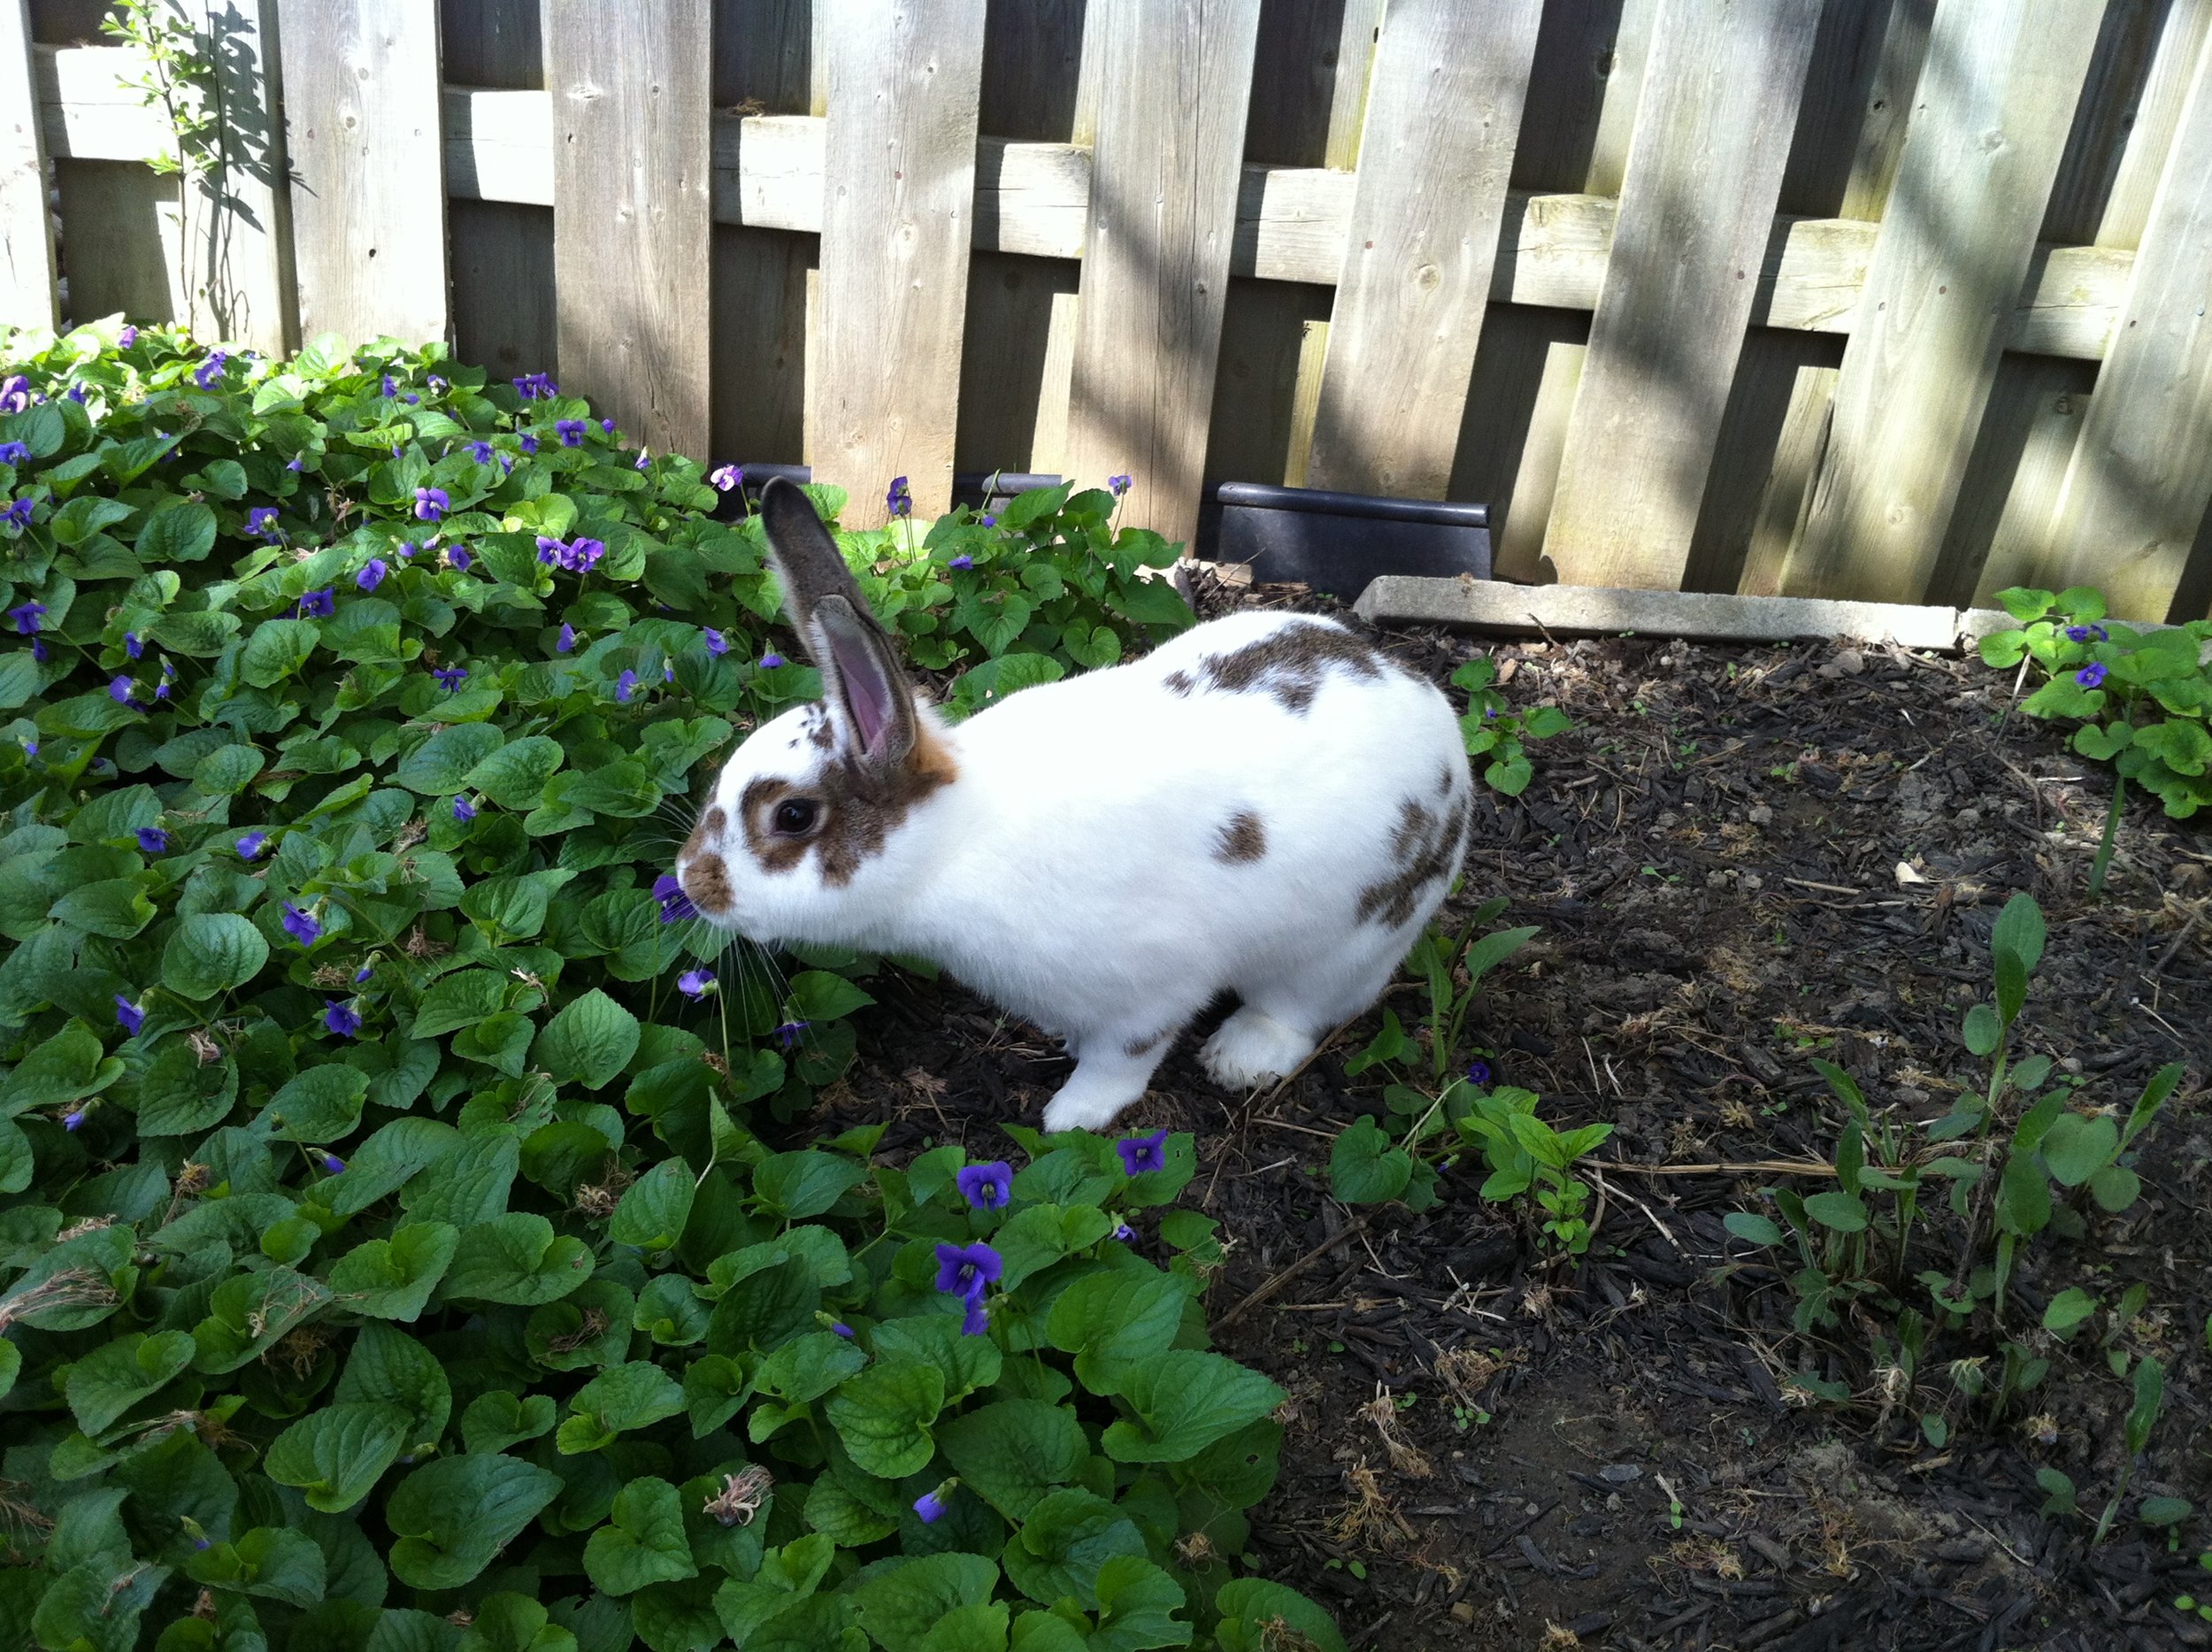 Botanist Bunny Identifies a Flower by Its Scent